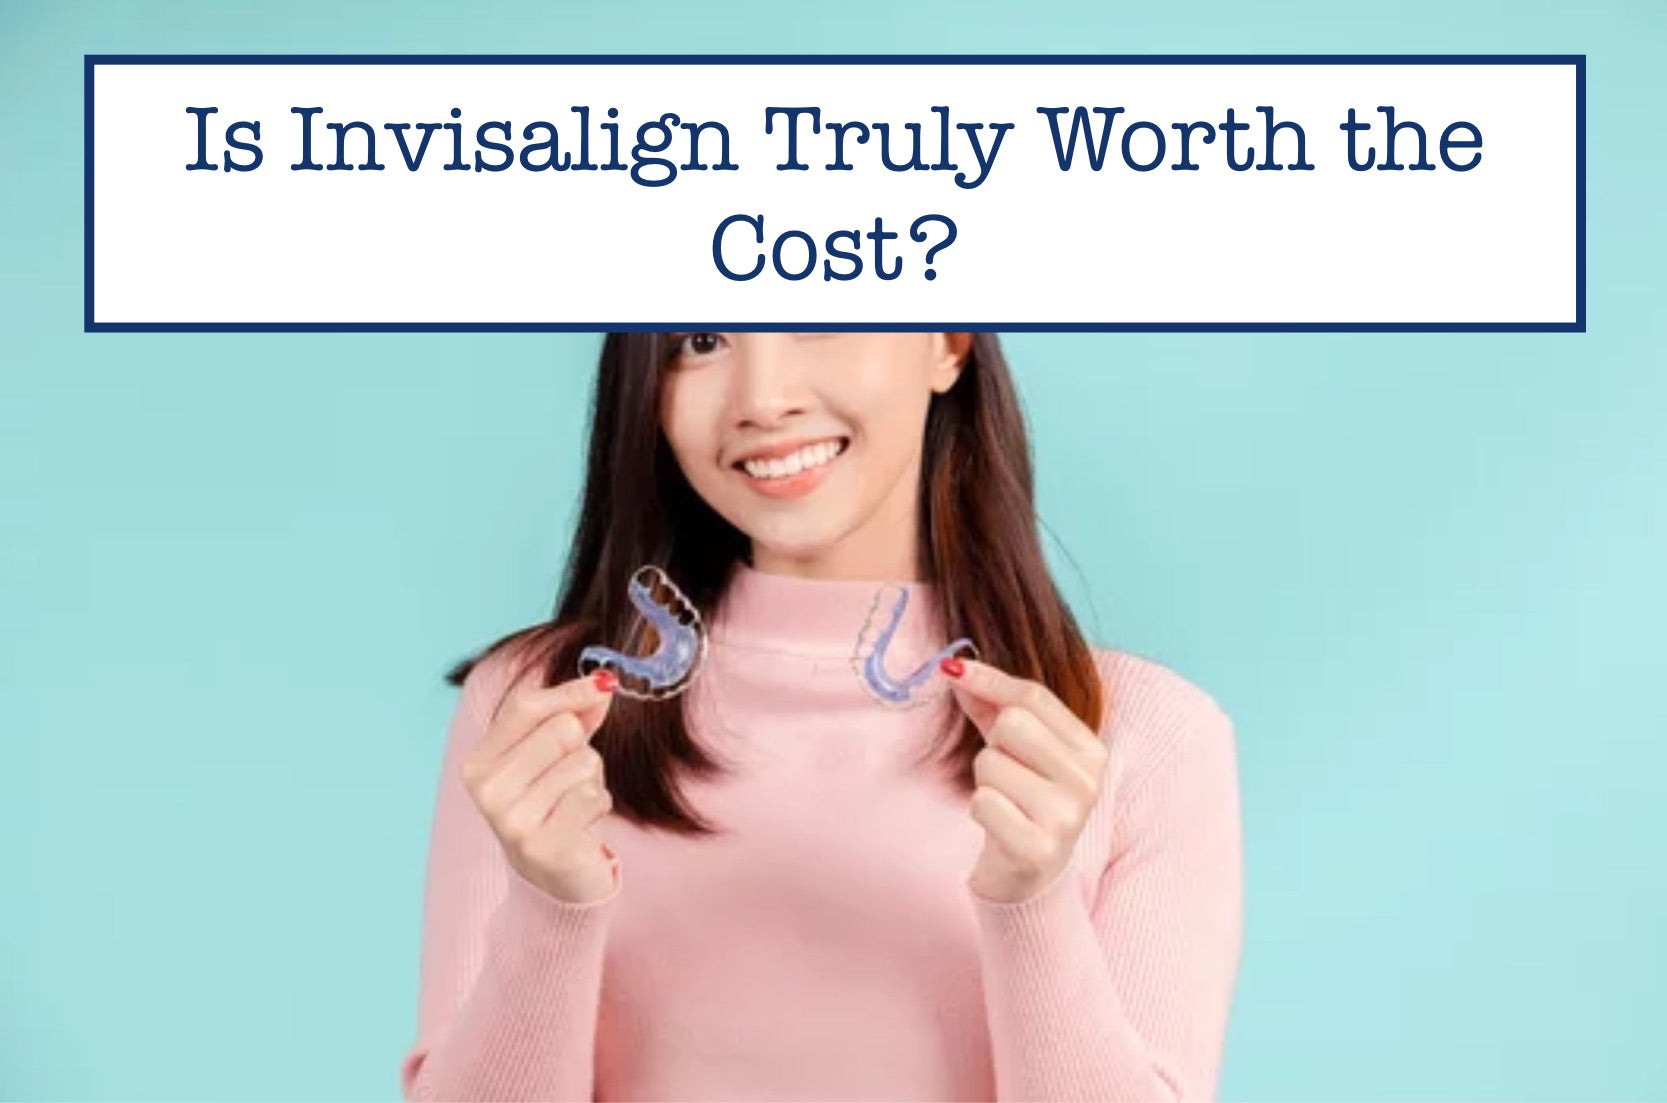 Is Invisalign Truly Worth the Cost?